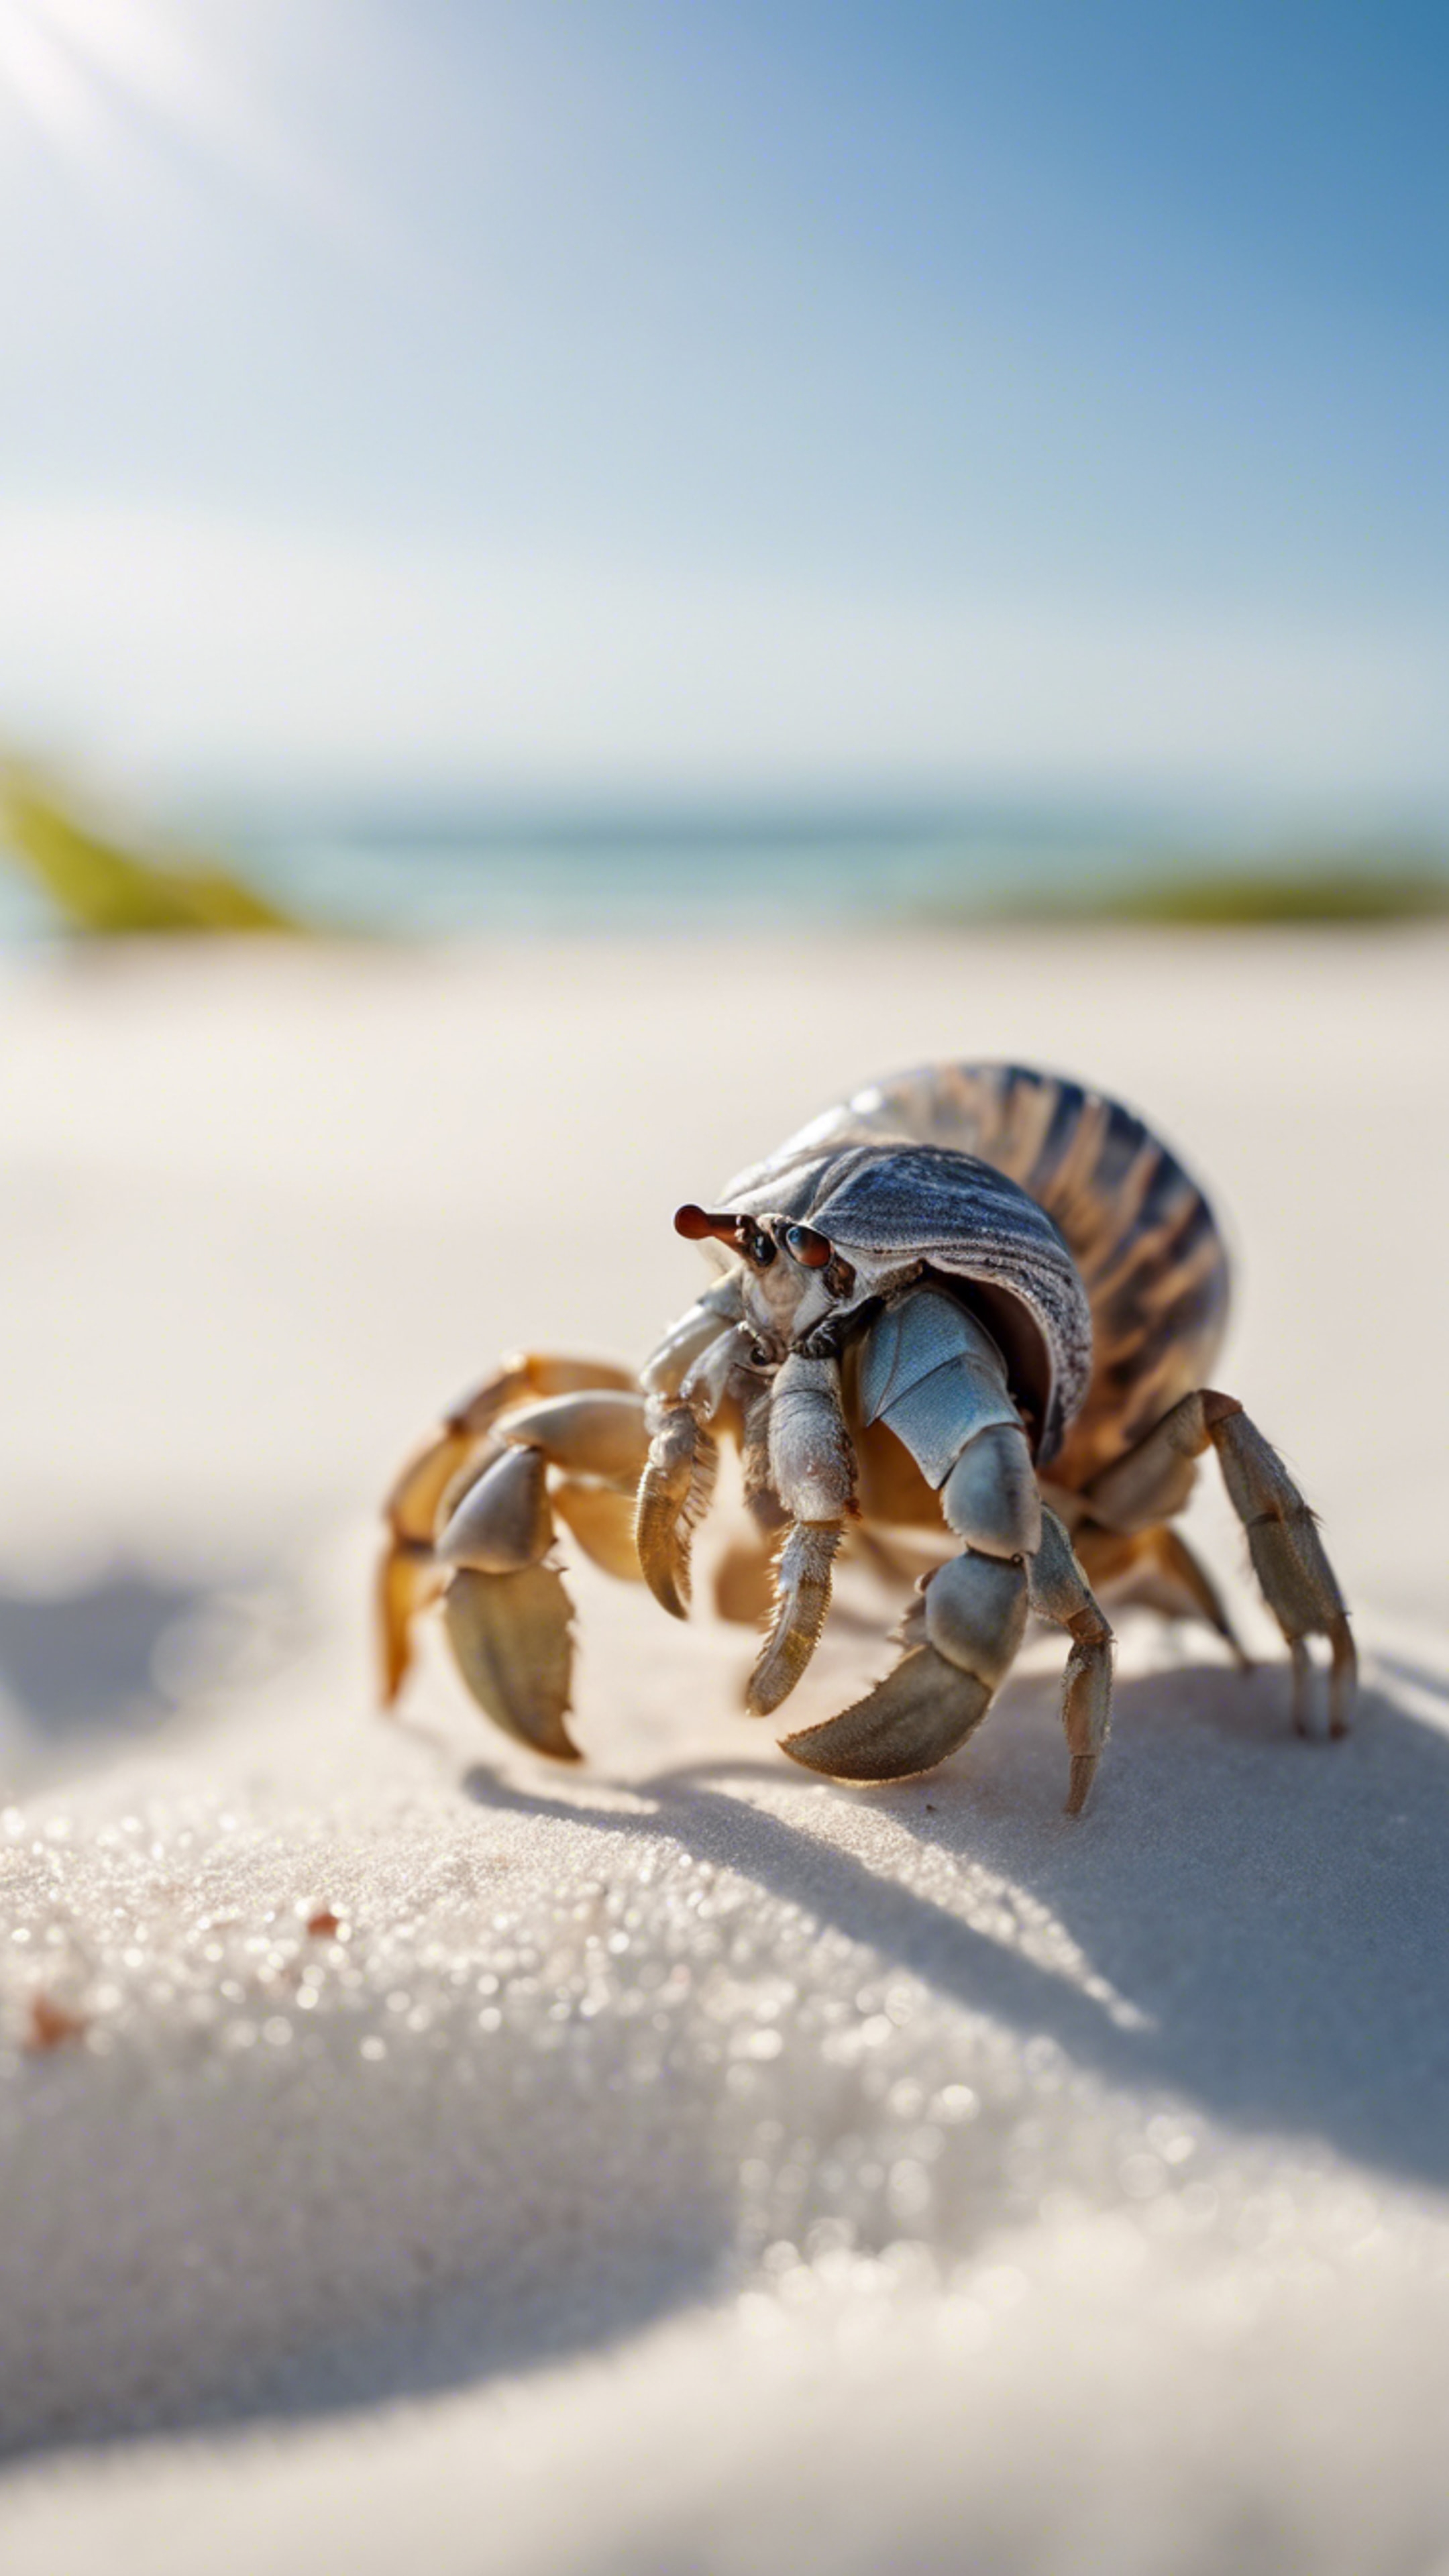 A light gray hermit crab scuttling on white sands under tropical afternoon sun. Wallpaper[11593da25dfa423c85a2]